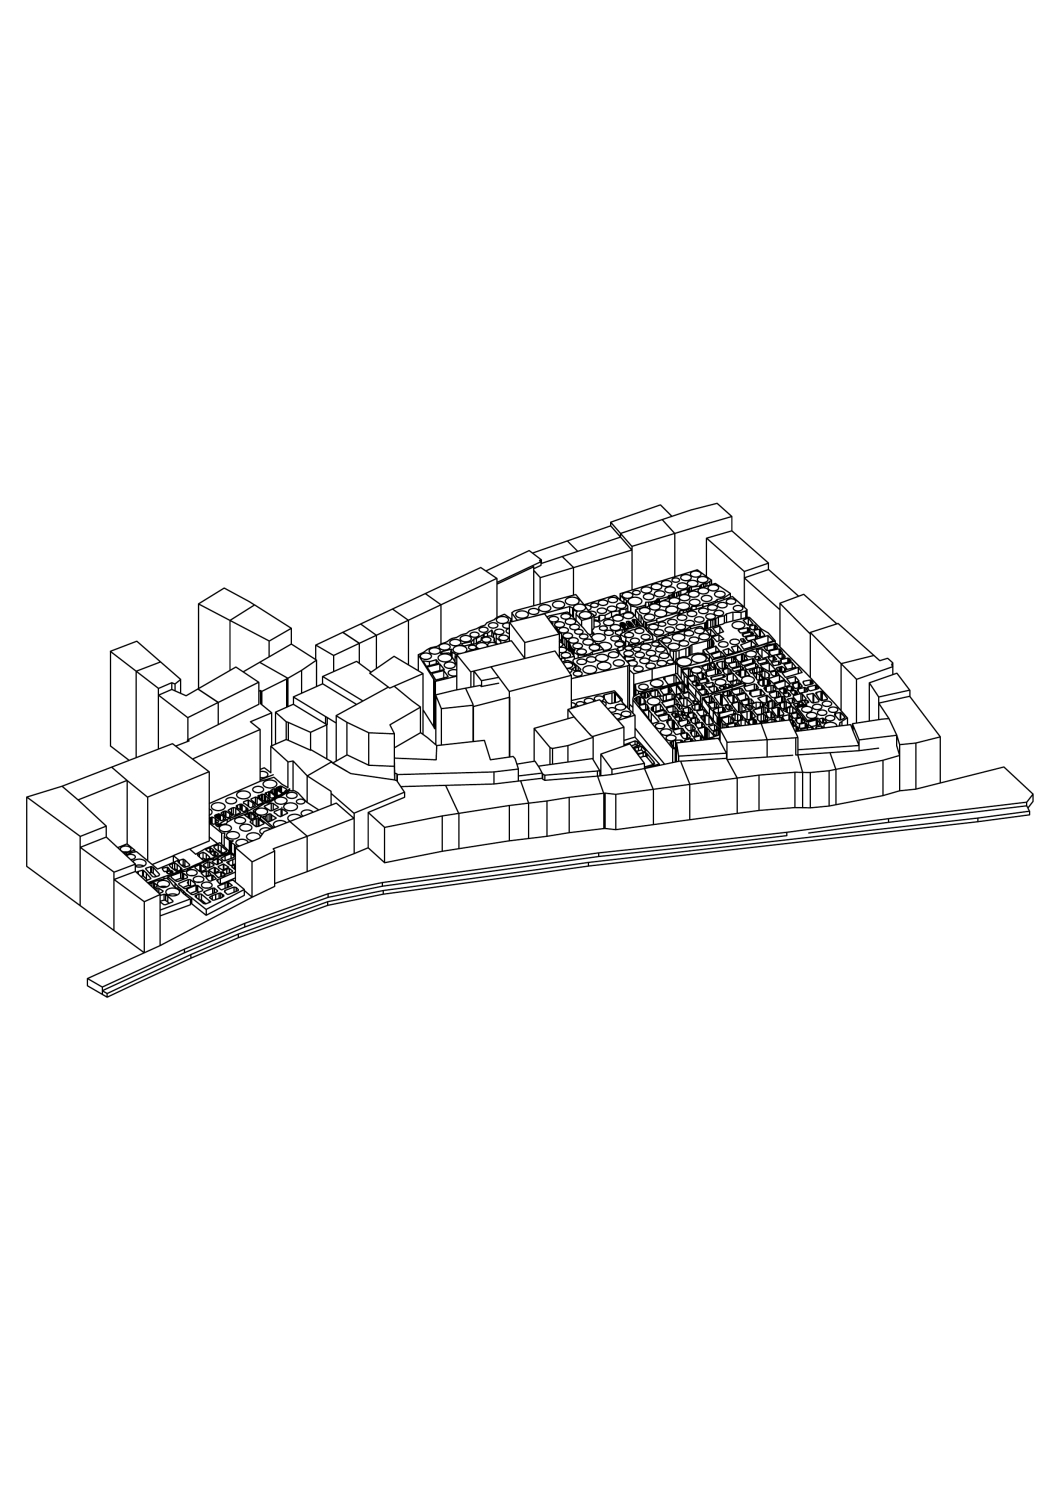 Axonometric projection of the tannery